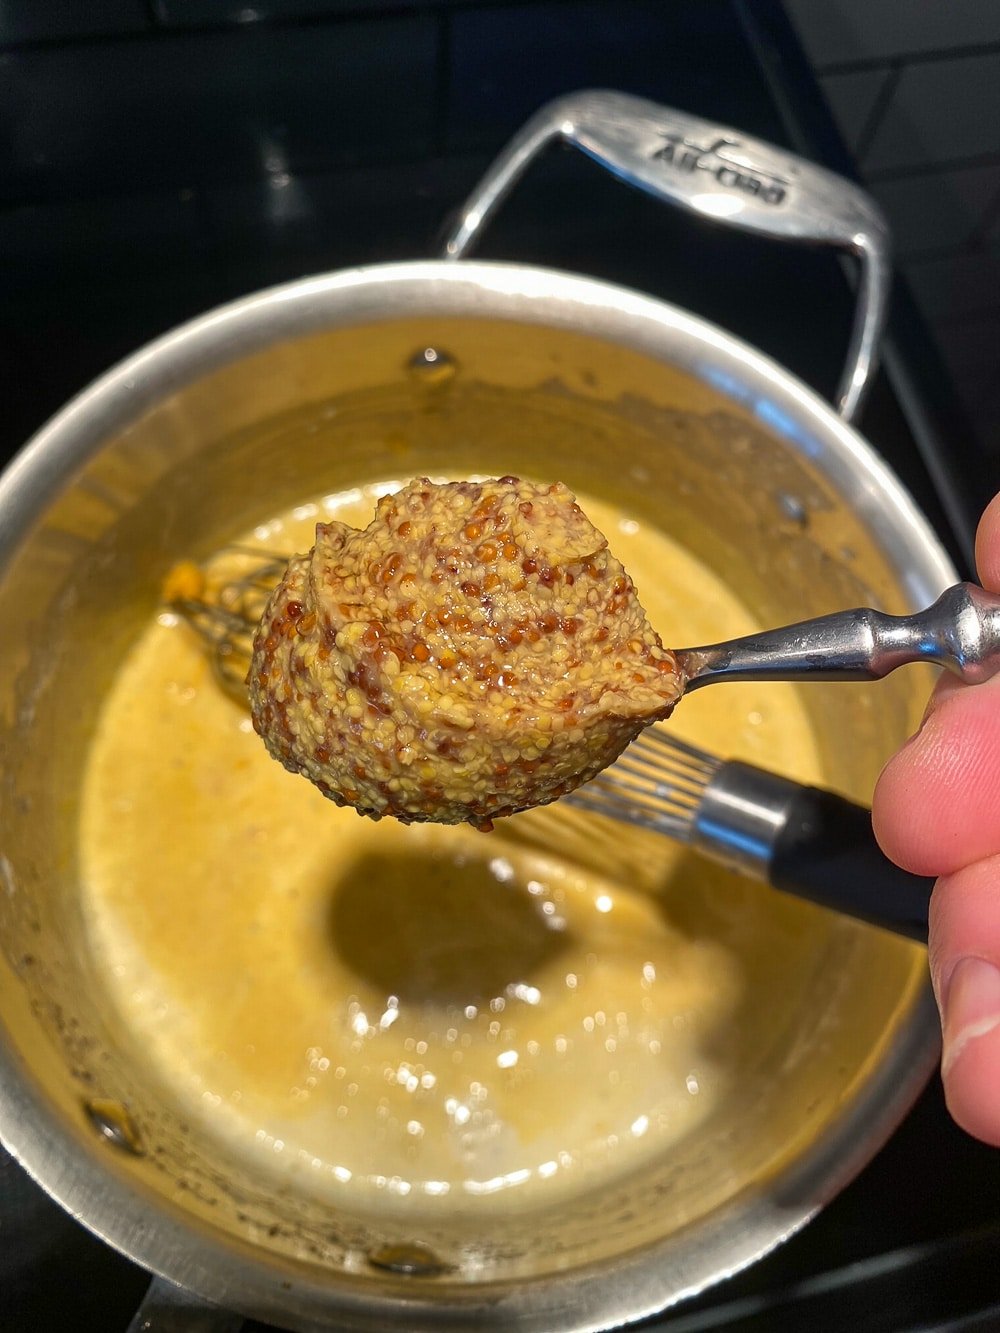 Adding the mustard to the sauce